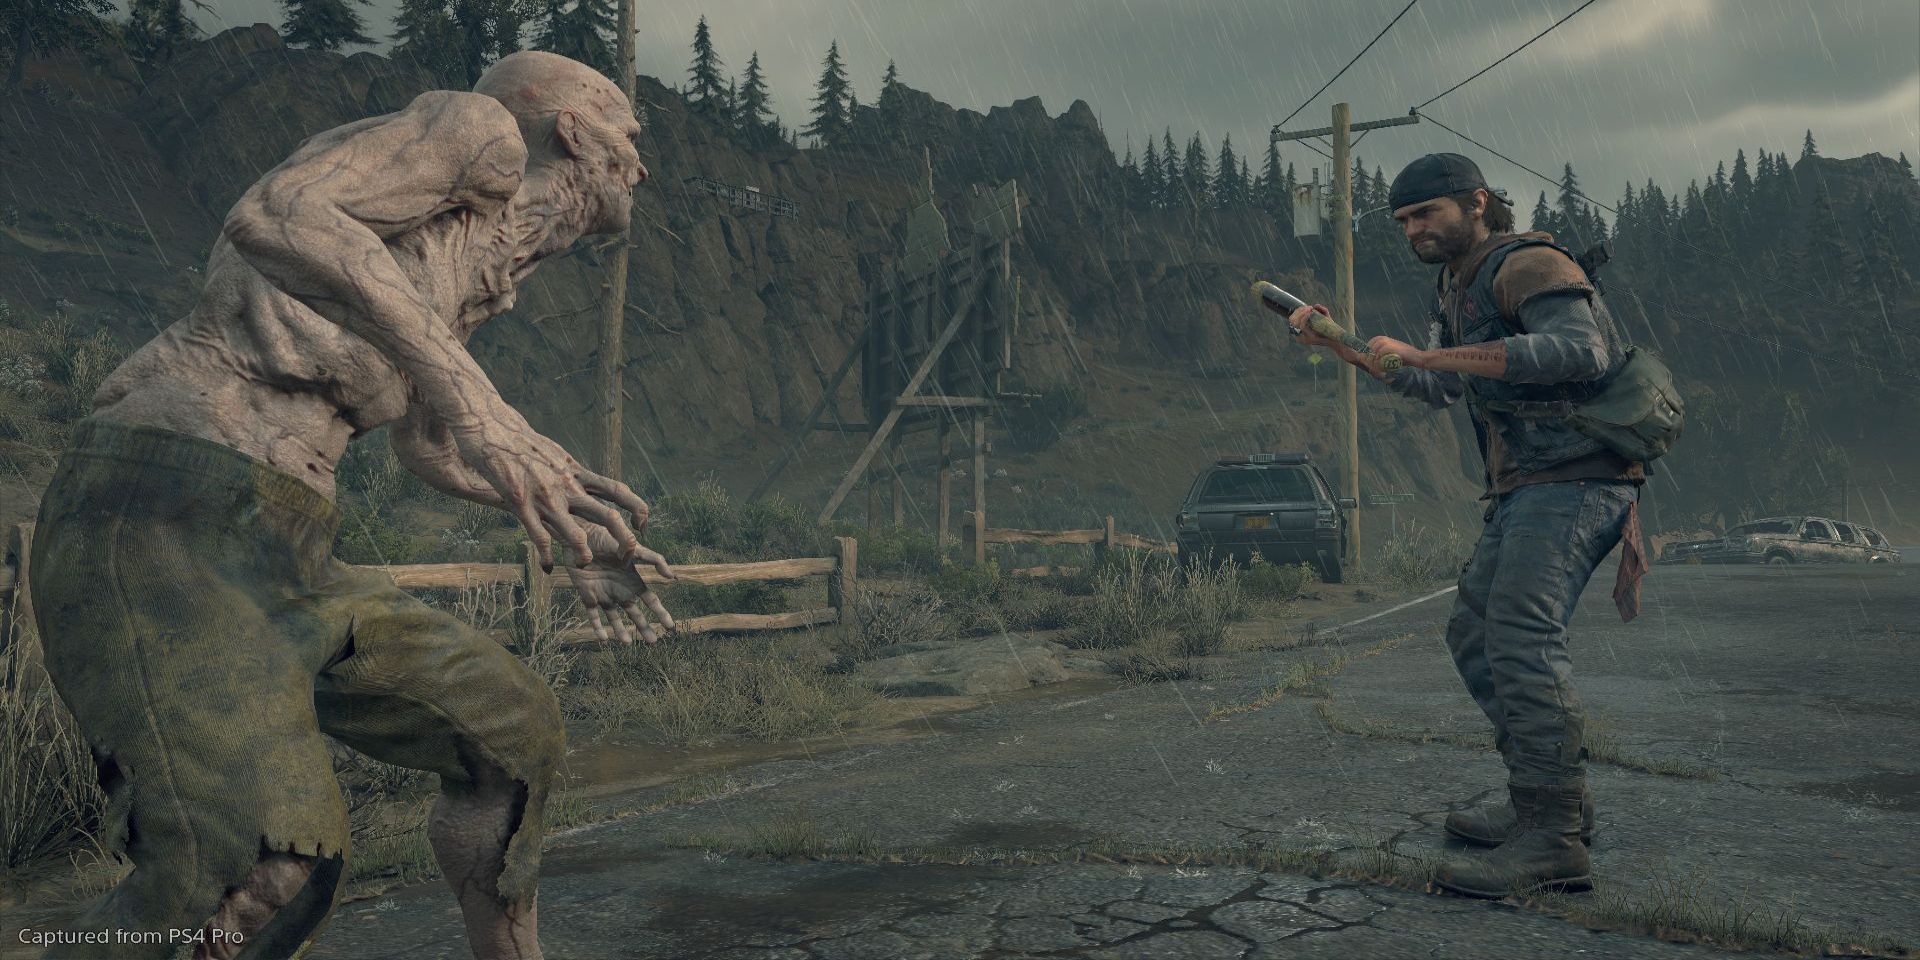 Days Gone' Hits PS4 in February